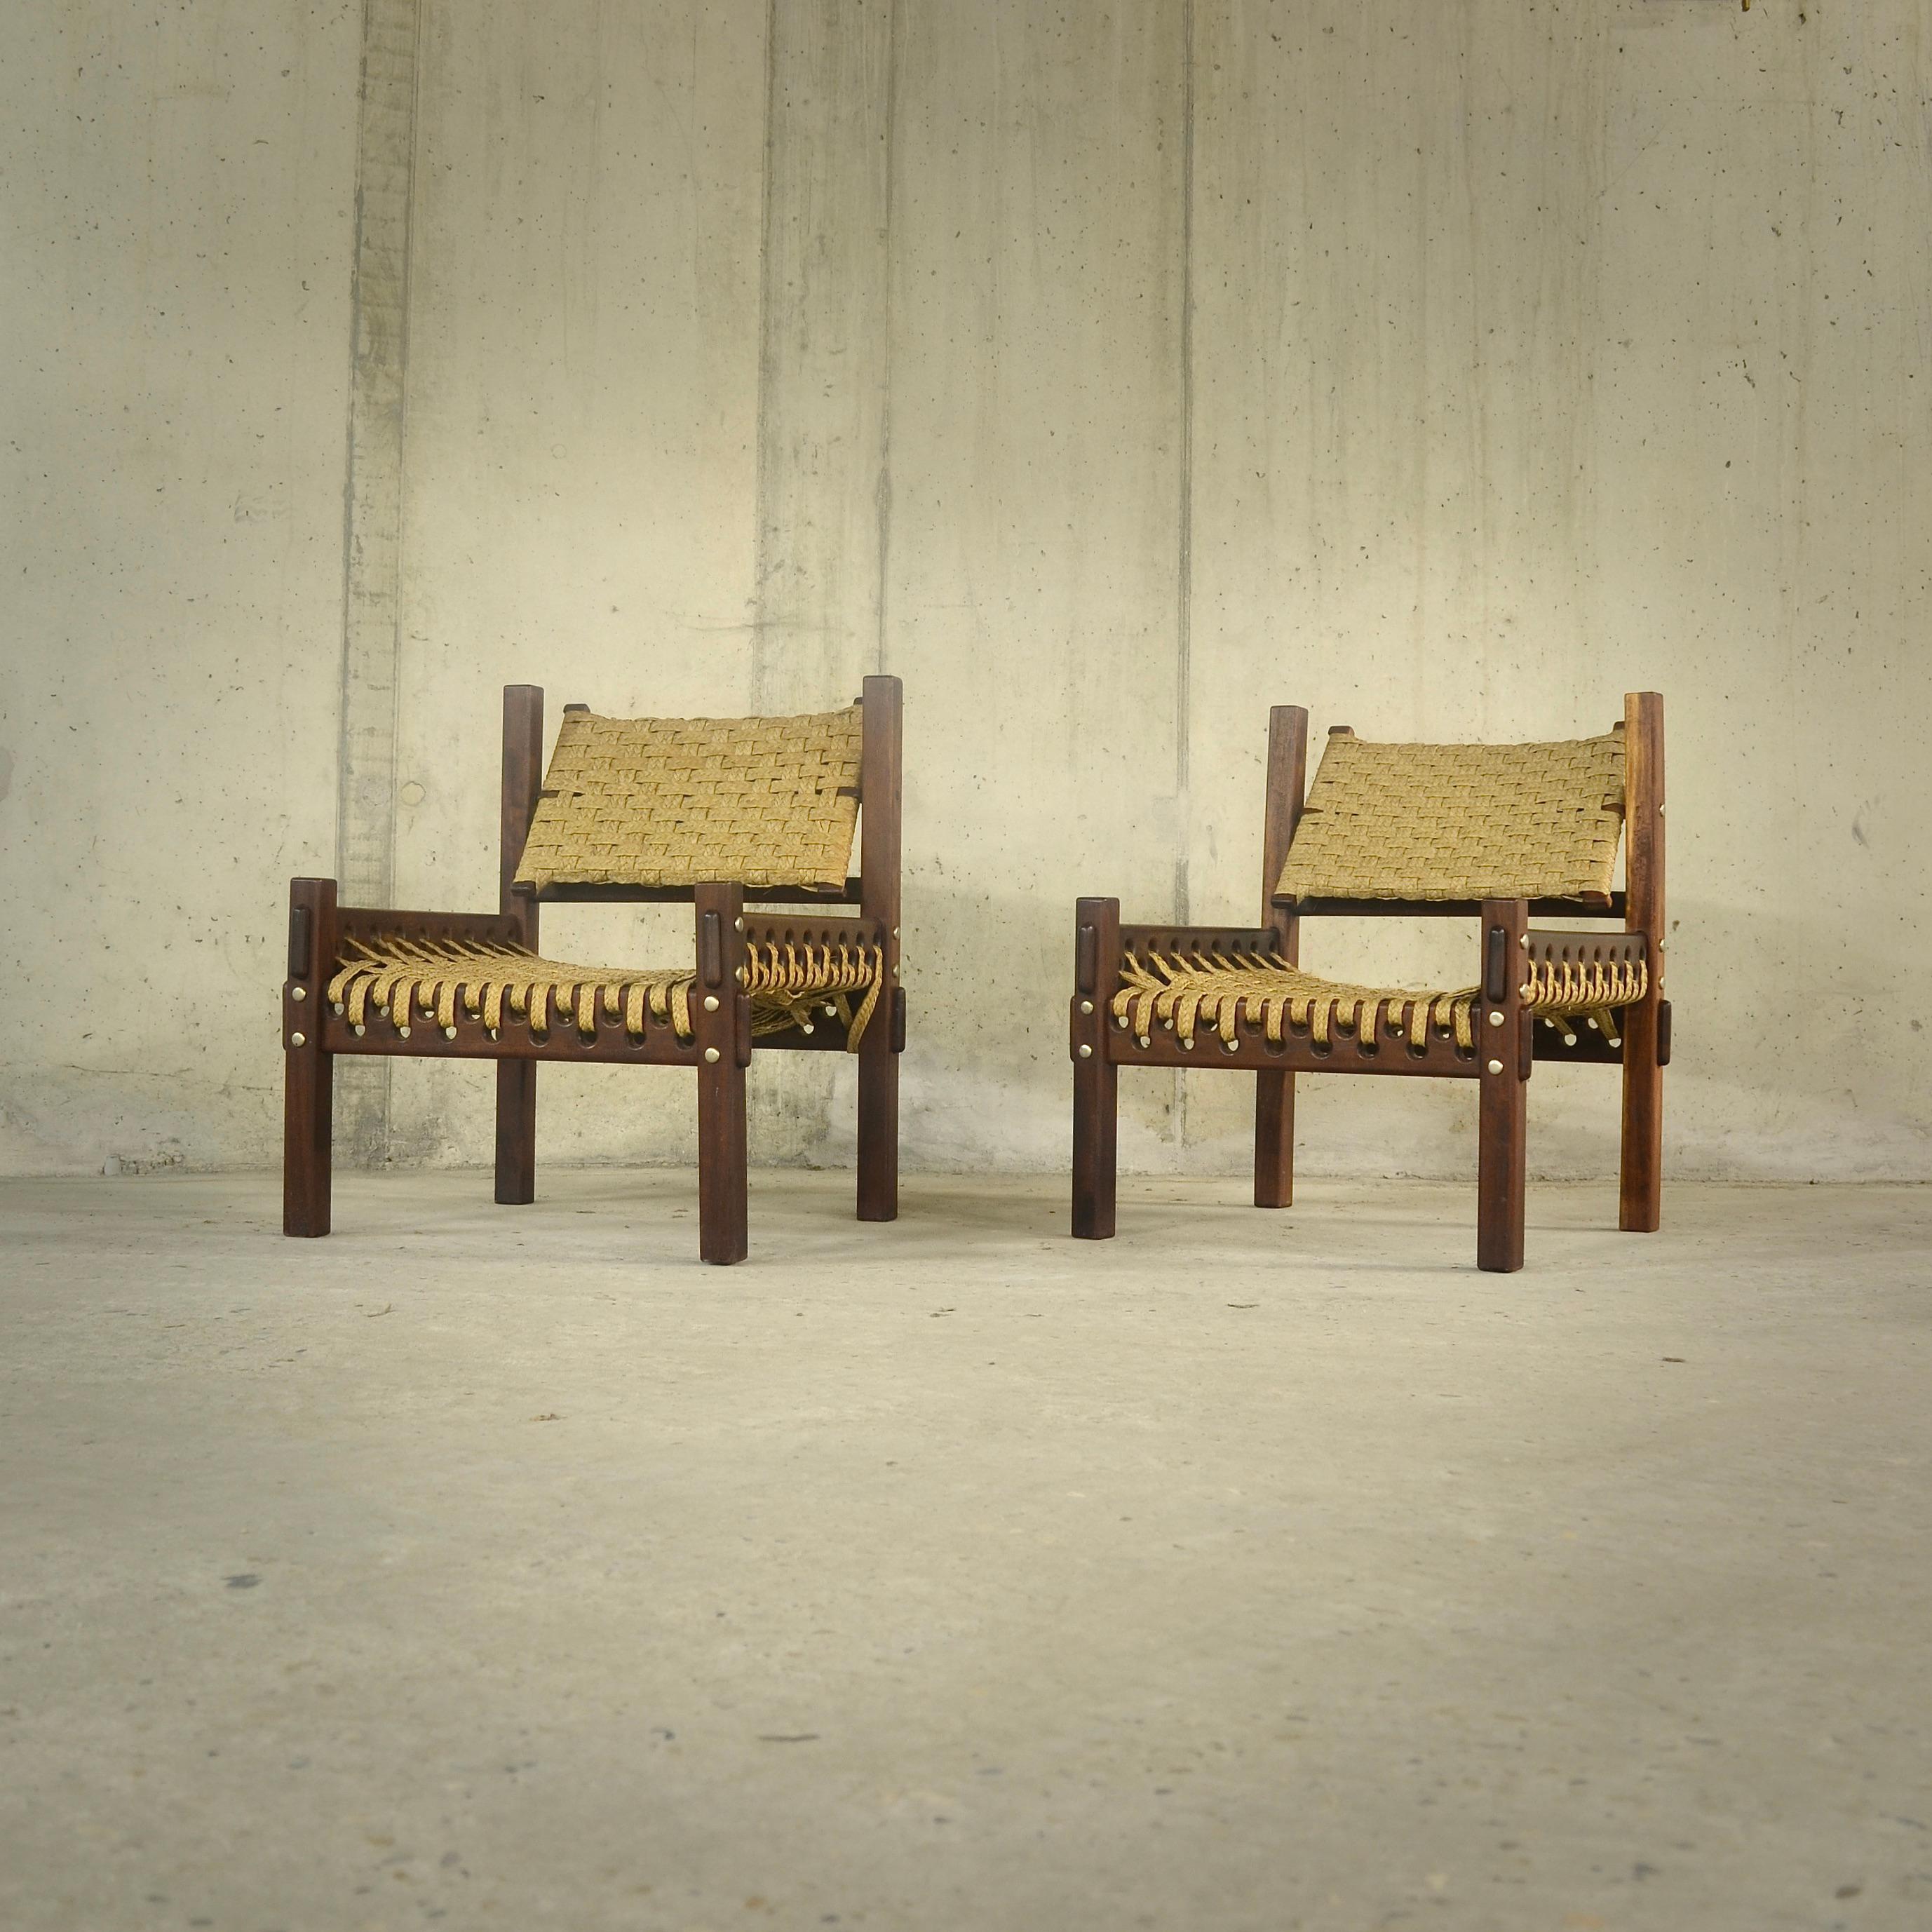 Mahogany and woven palm fiber armchairs, 1960s For Sale 5